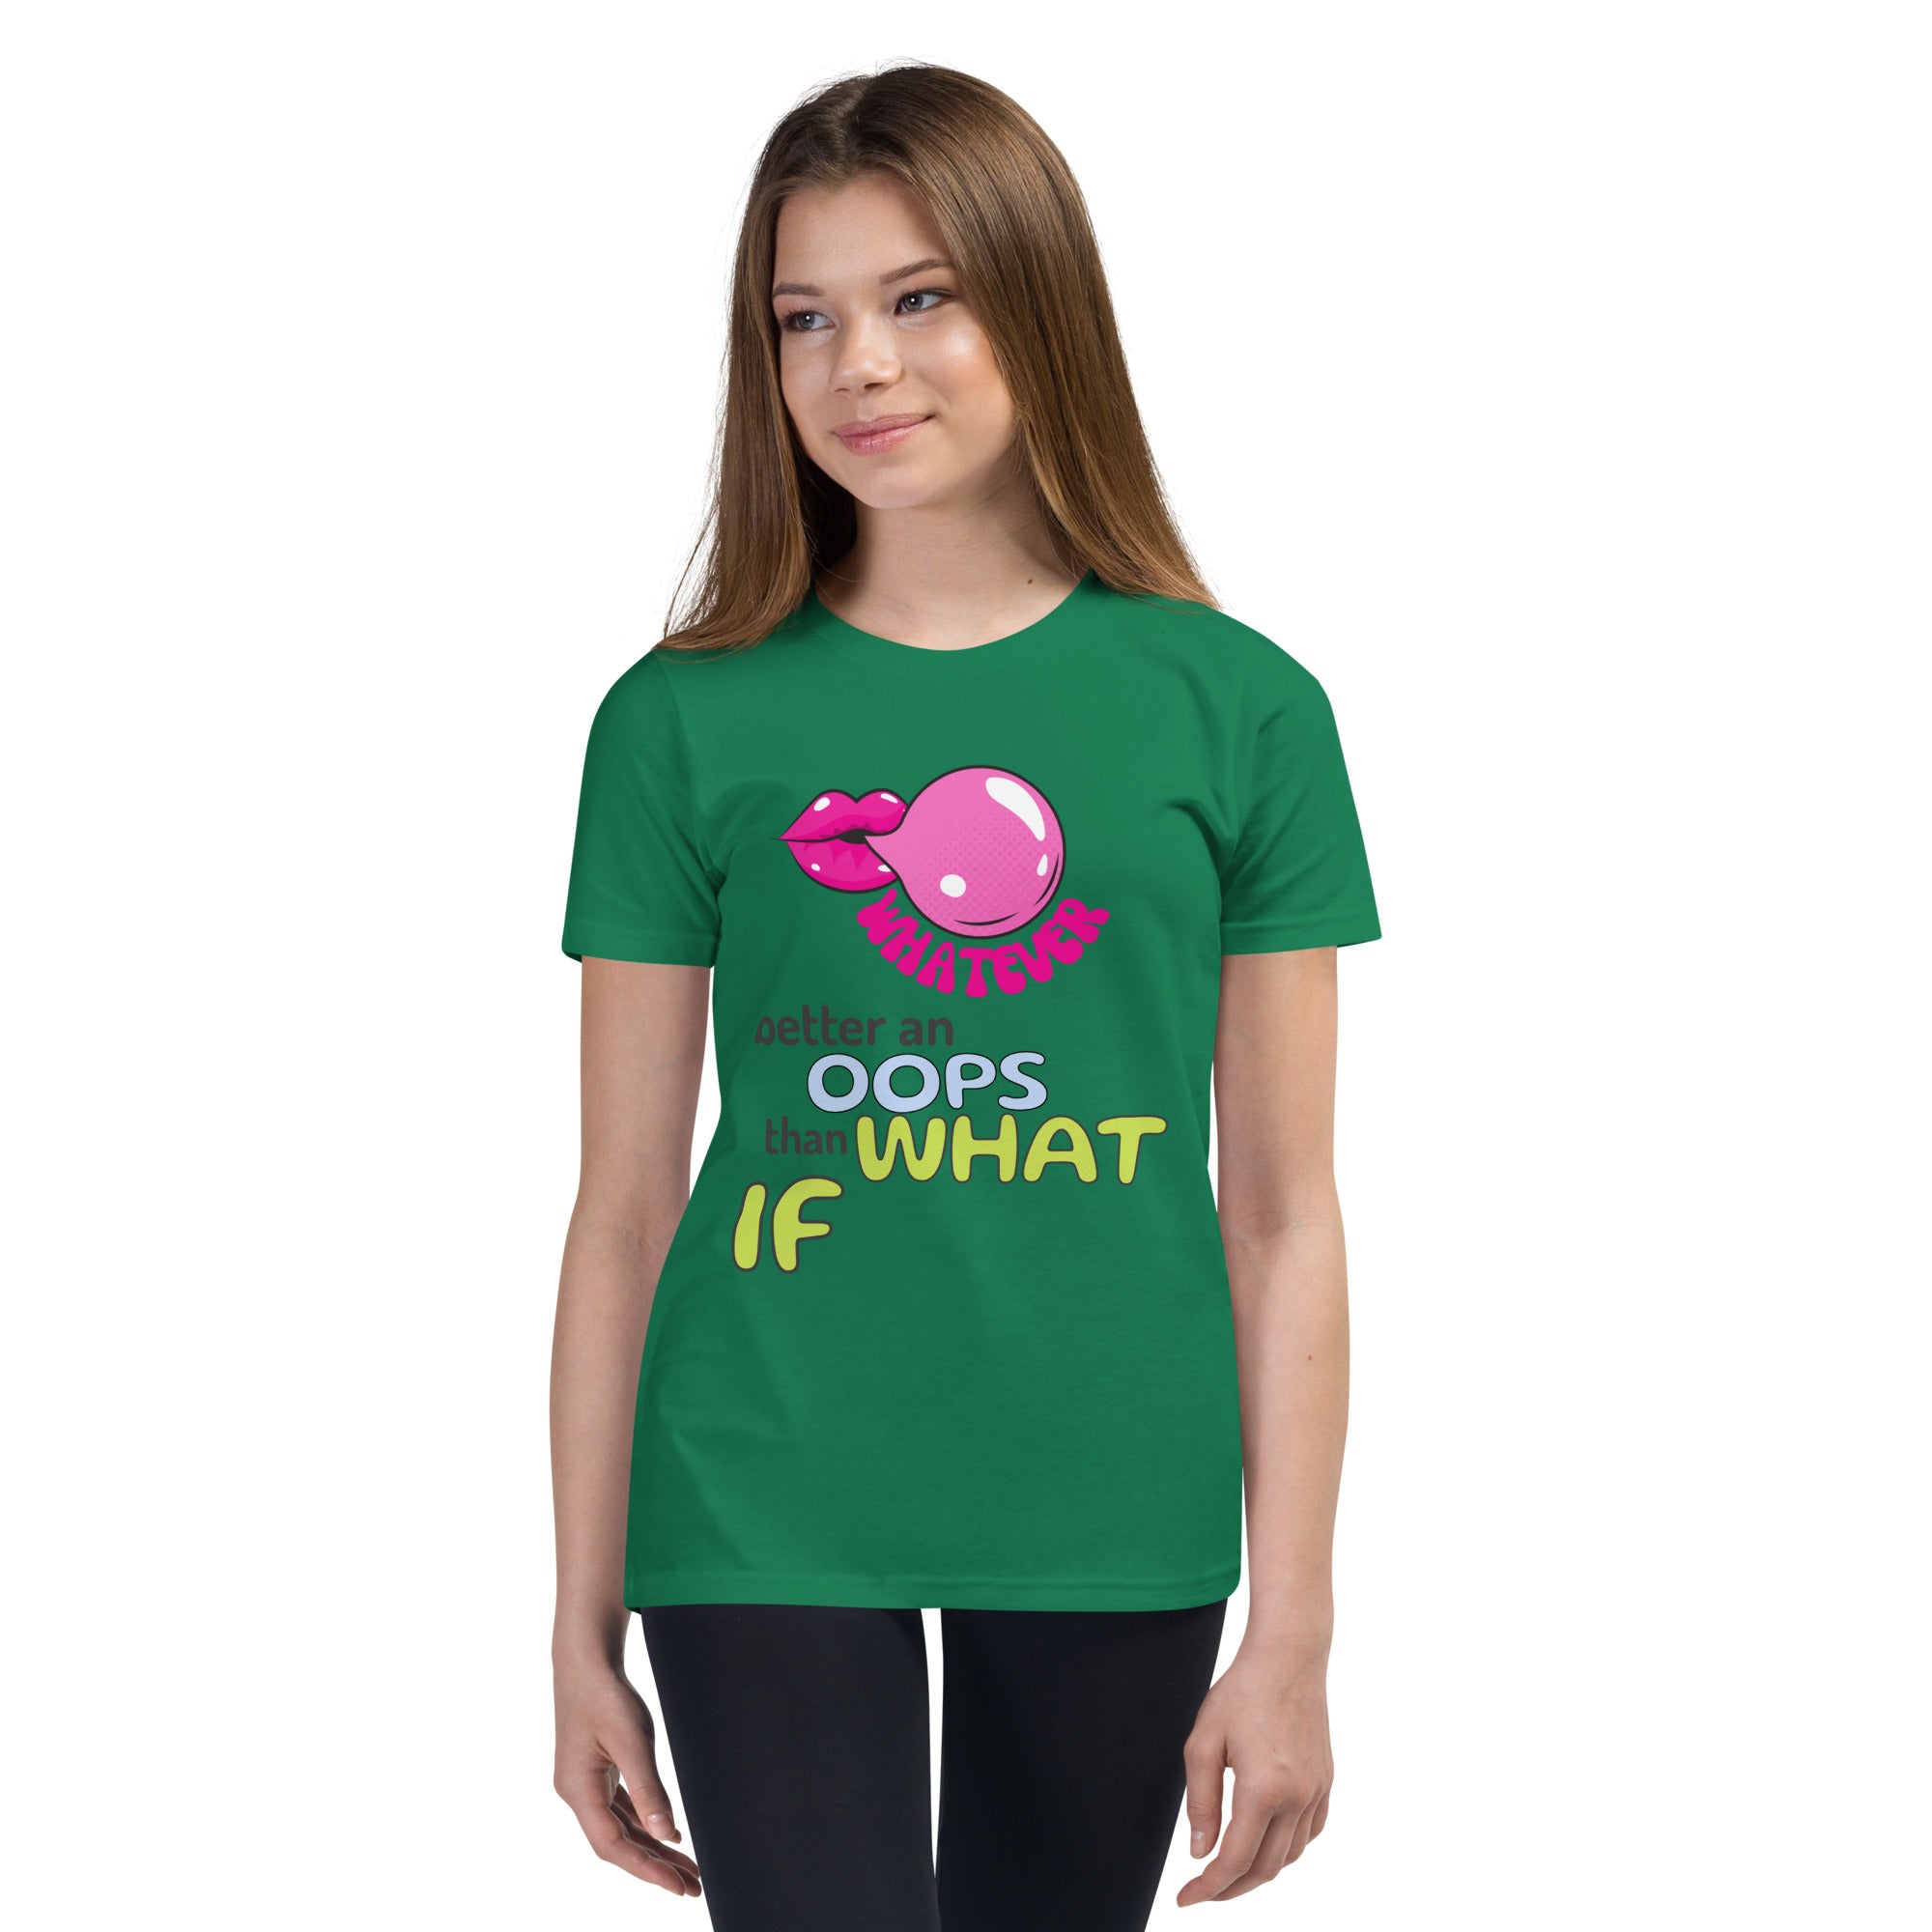 Whatever -Youth Short Sleeve T-Shirt